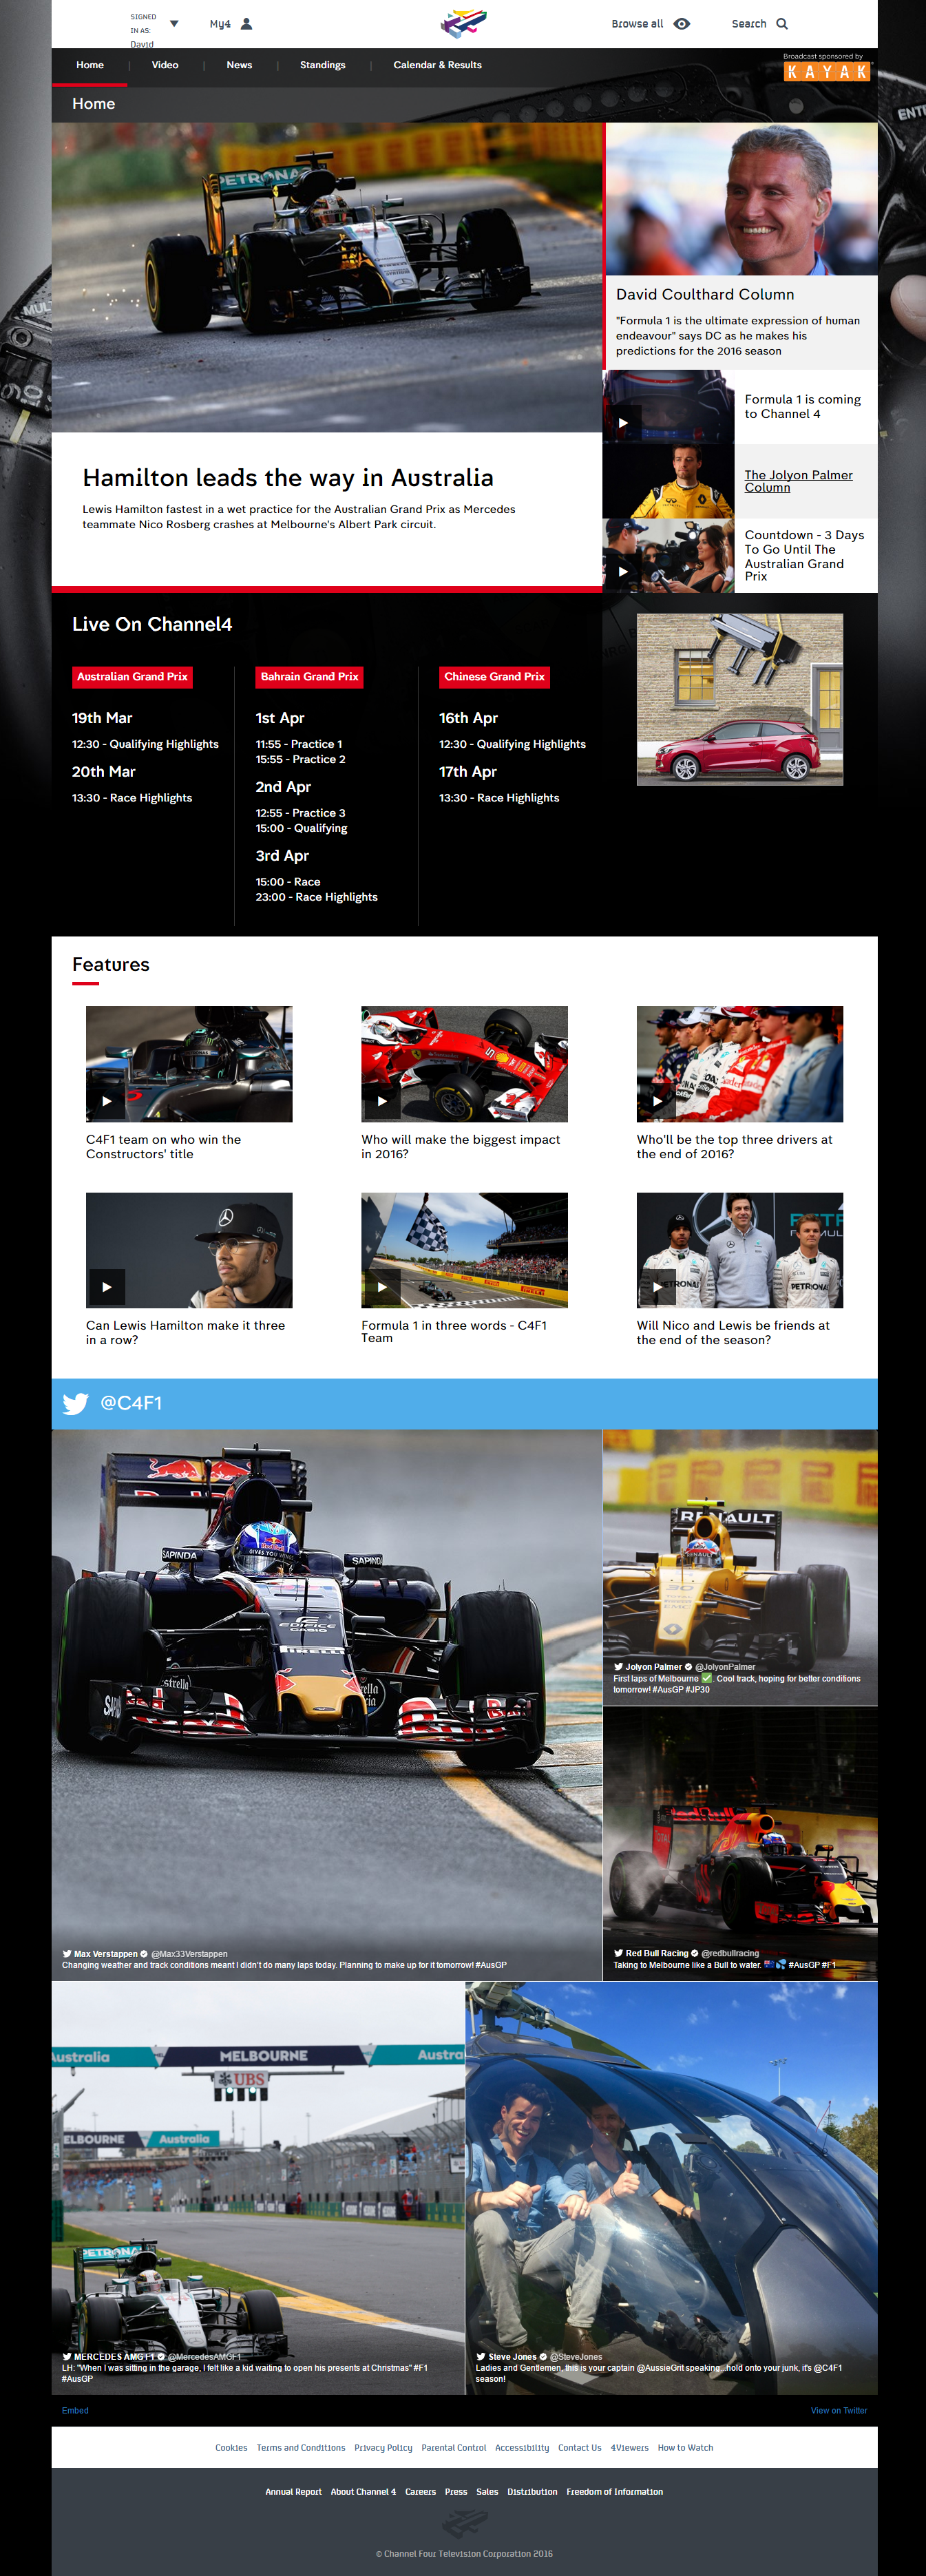 Channel 4 launches new Formula 1 website